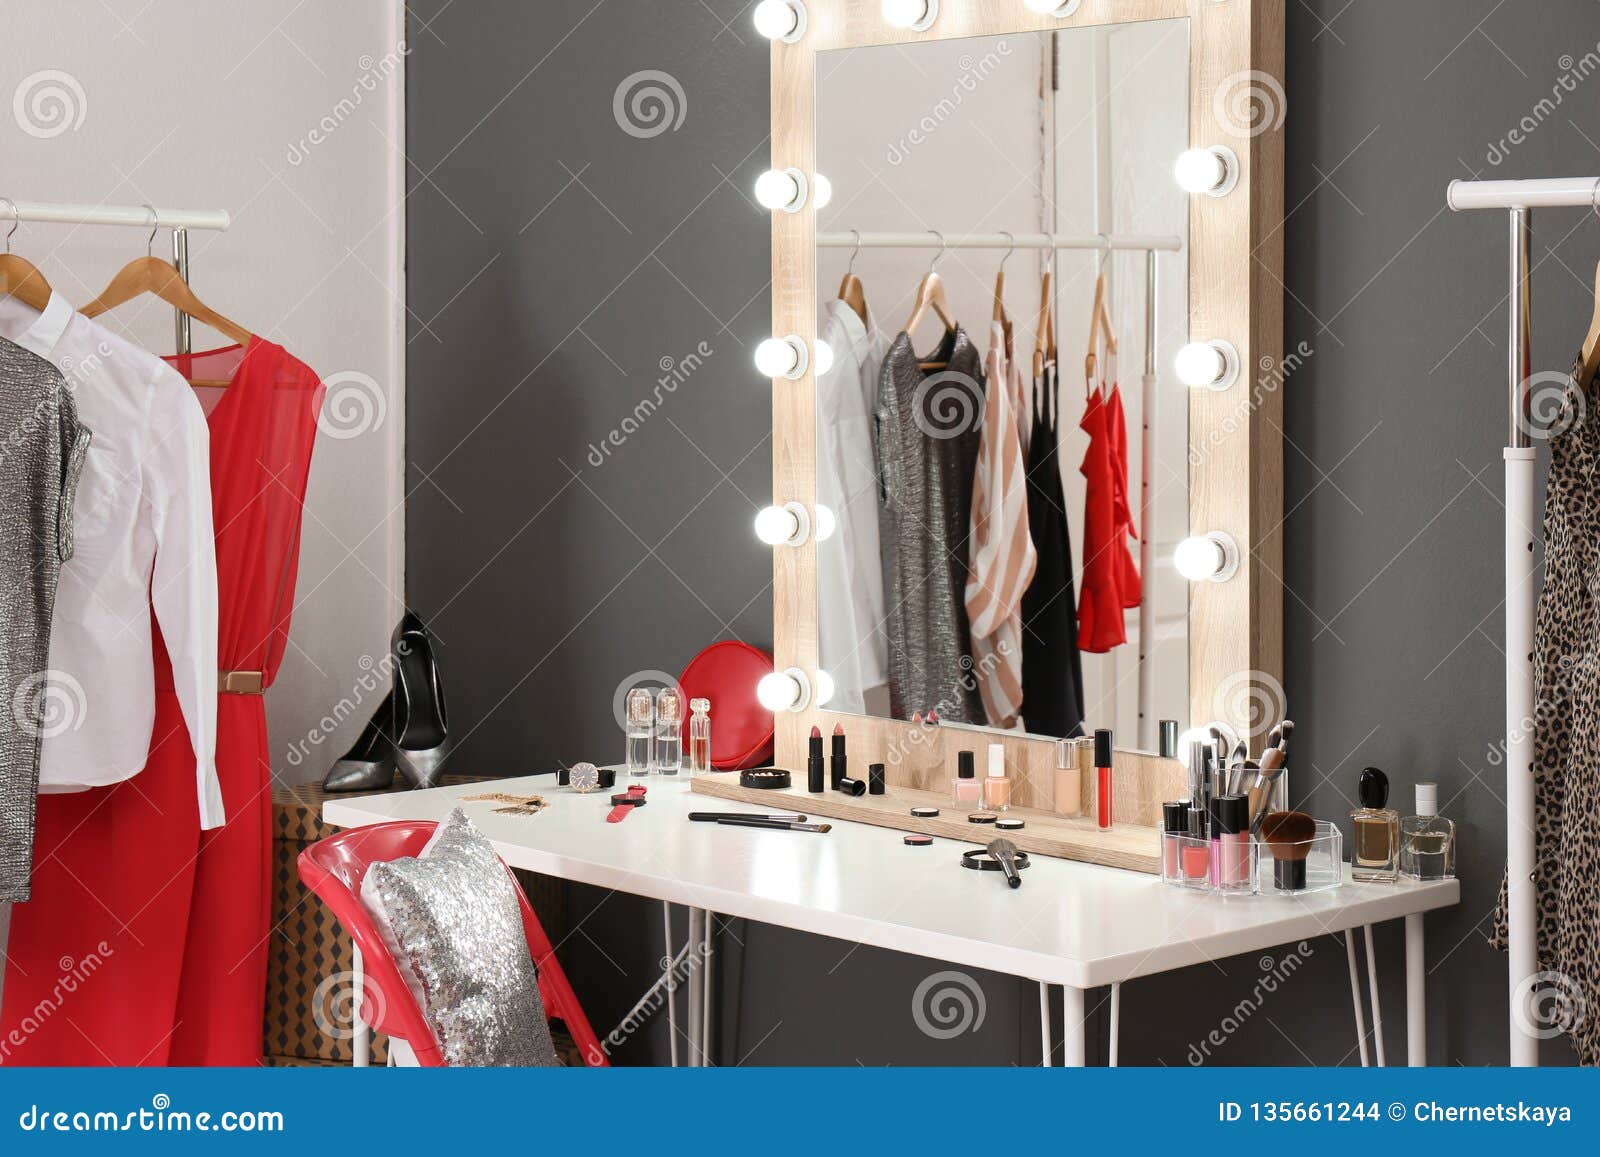 Stylish Room With Dressing Table Mirror And Rack Stock